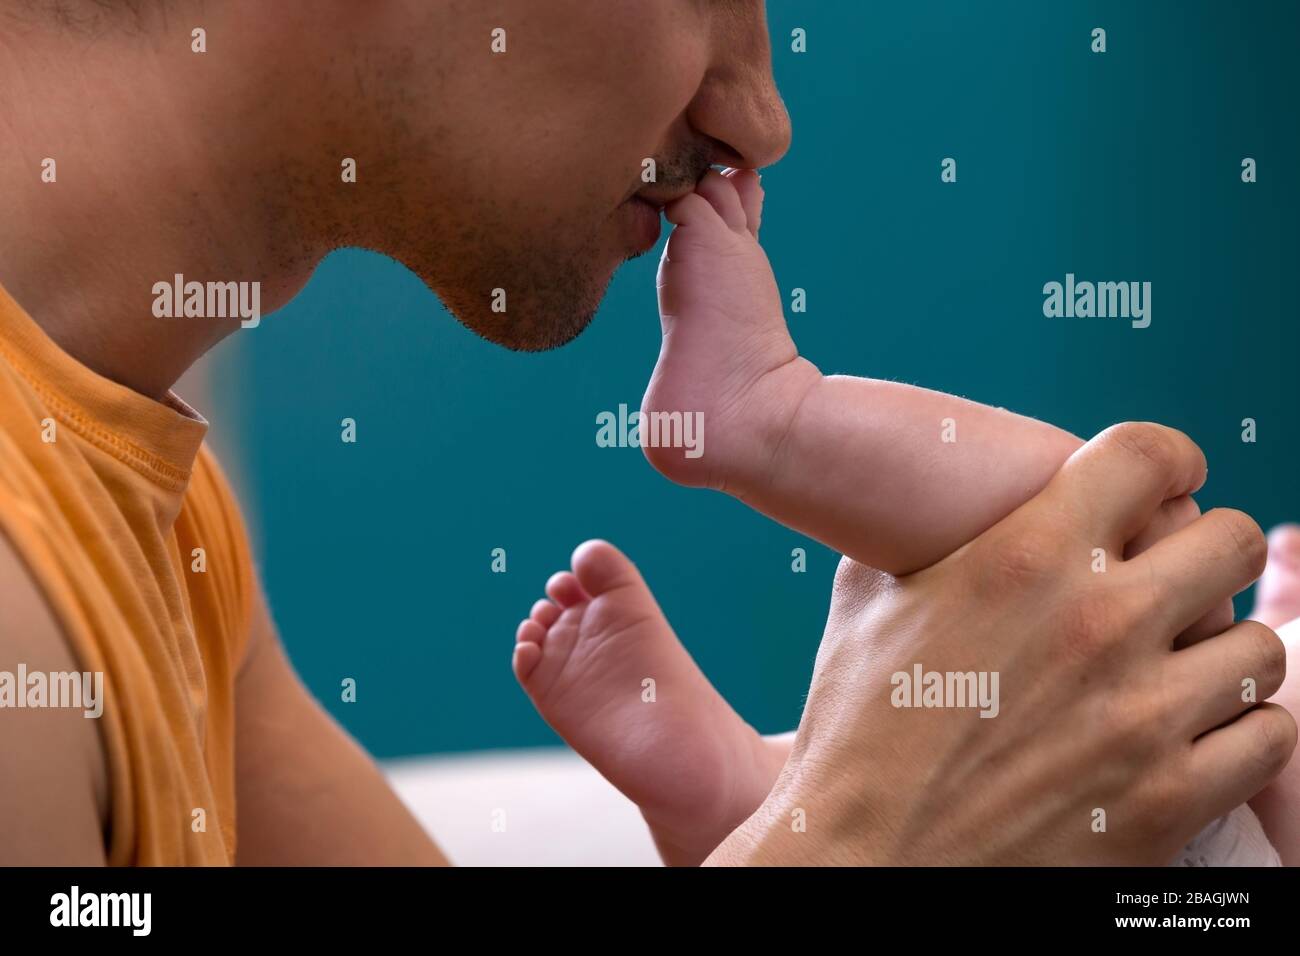 Emotional dad kissing his brand new baby’s foot Stock Photo